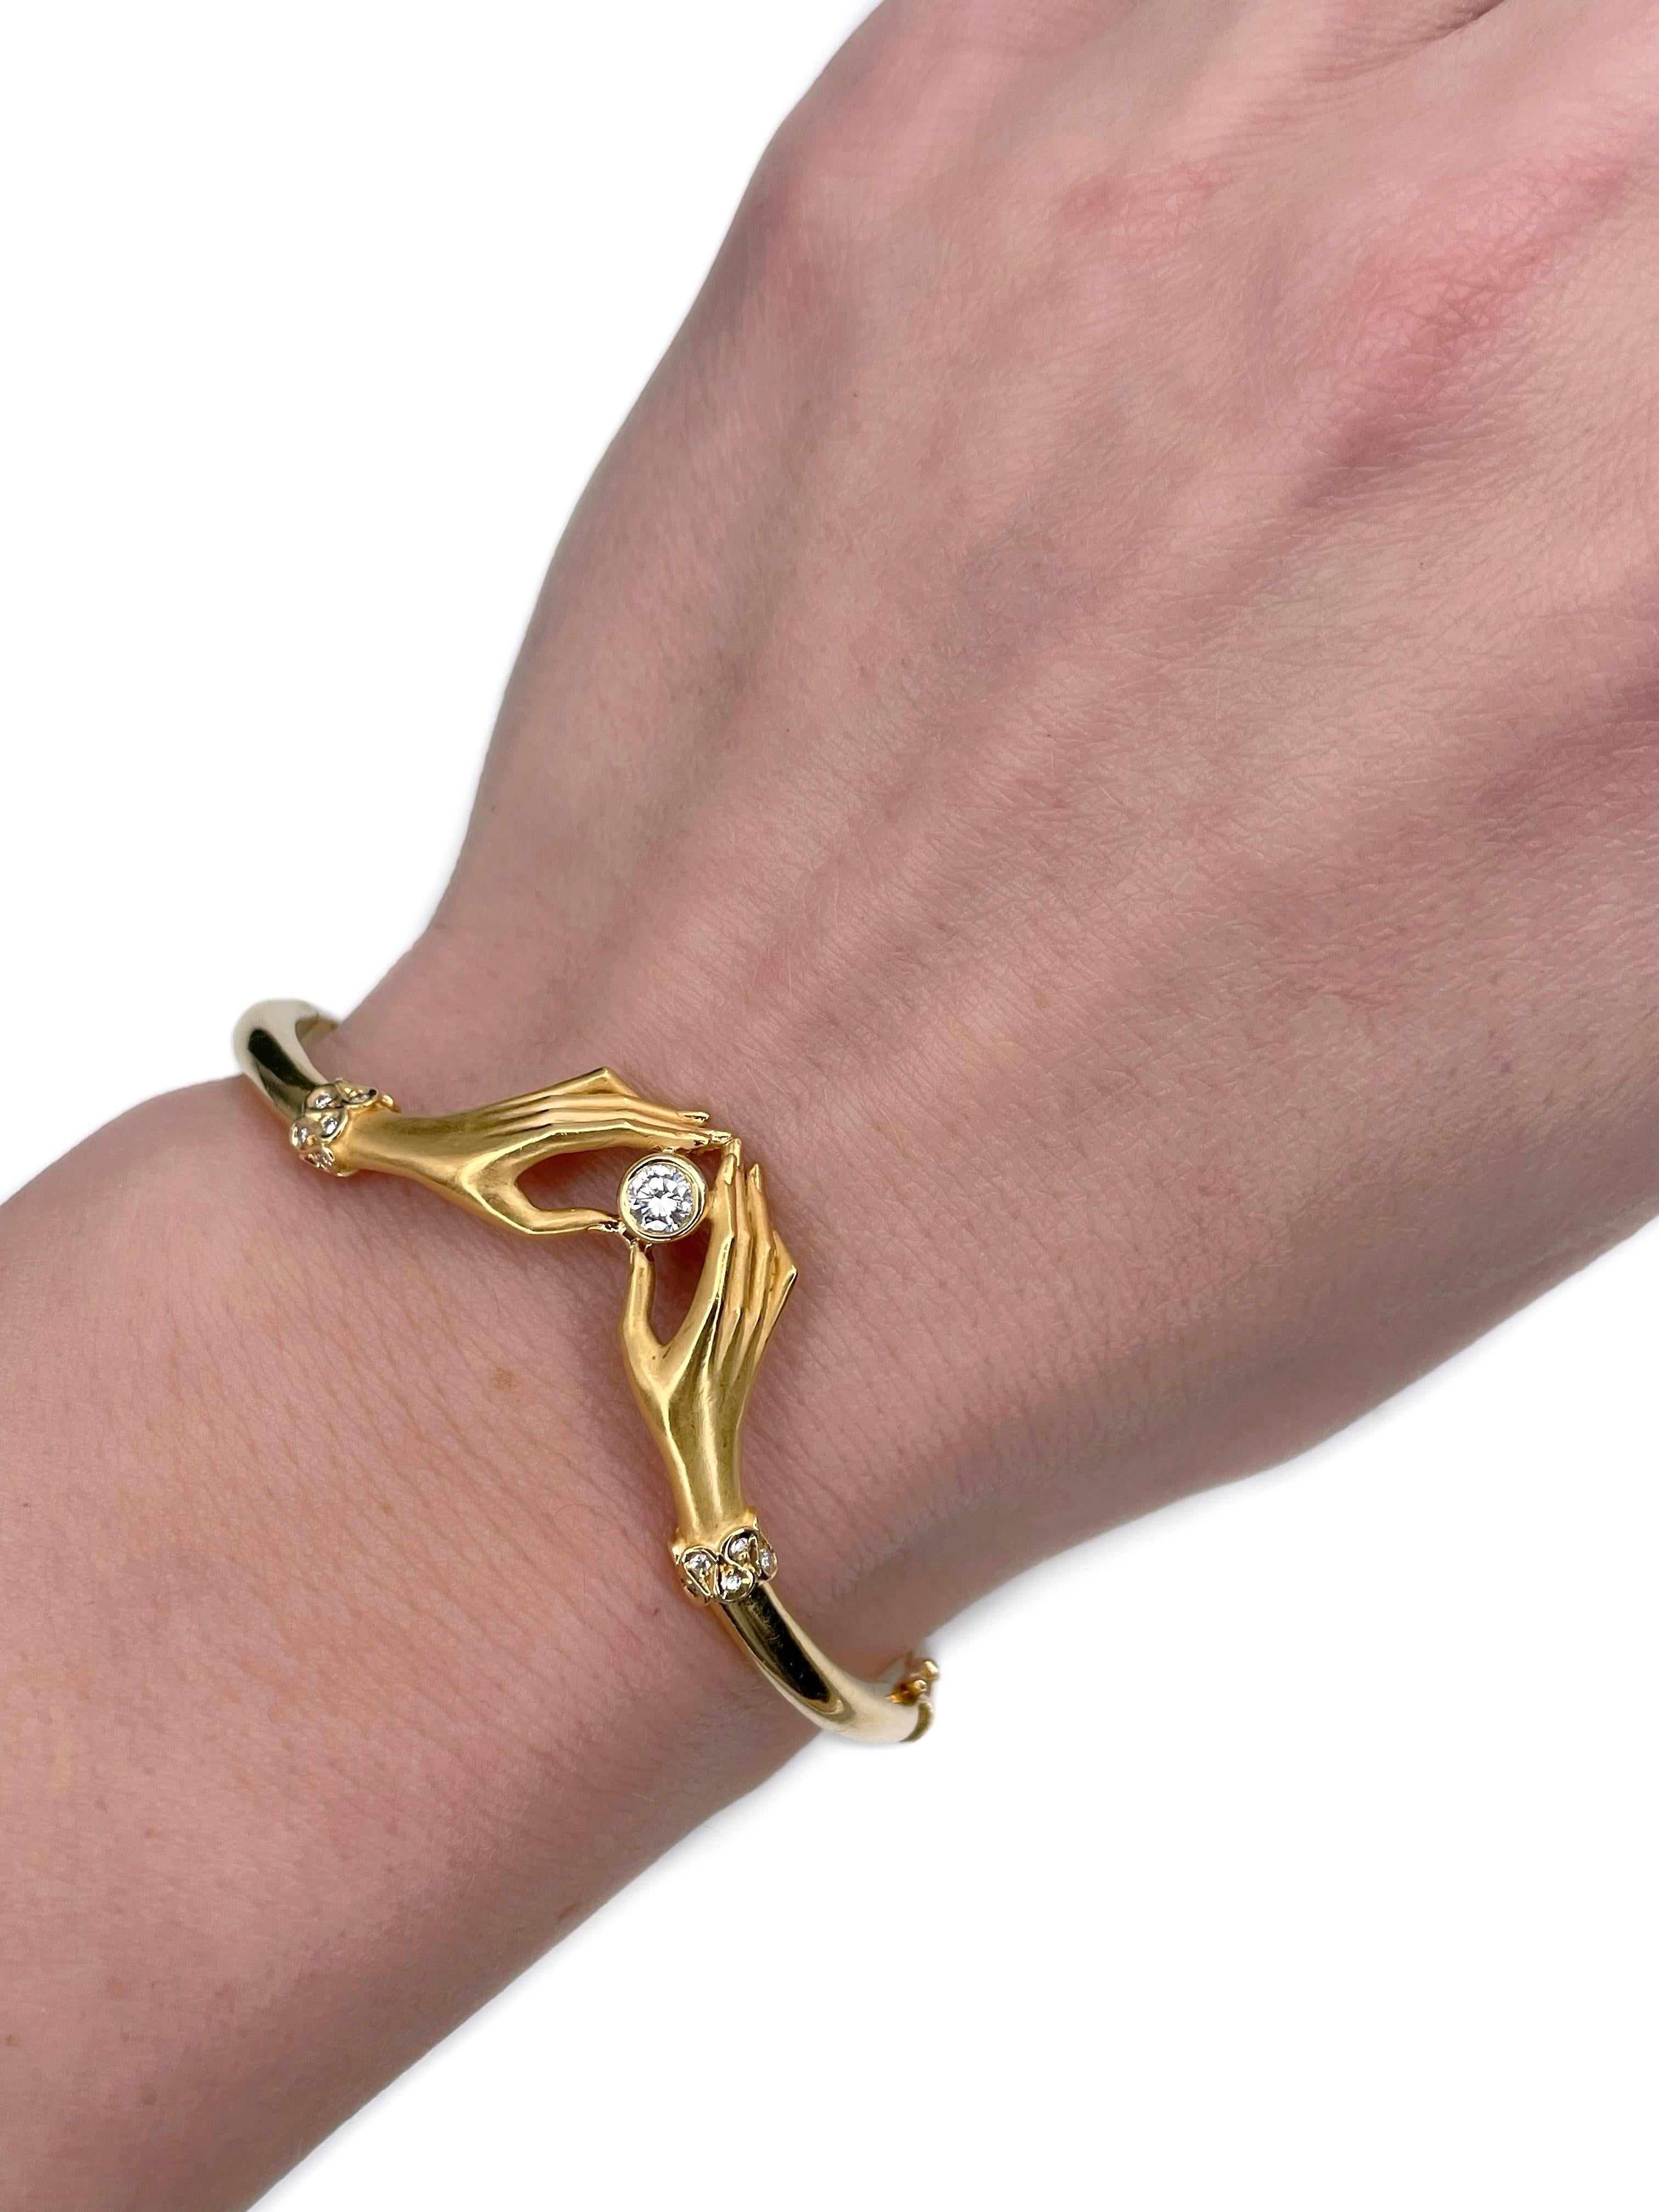 This is an elegant hinged bangle bracelet designed by Spanish jewellery brand “Carrera Y Carrera” in 2000s. It is crafted in 18K yellow gold. The piece depicts two hands holding a diamond.

There are hallmarks and serial number (shown in photo